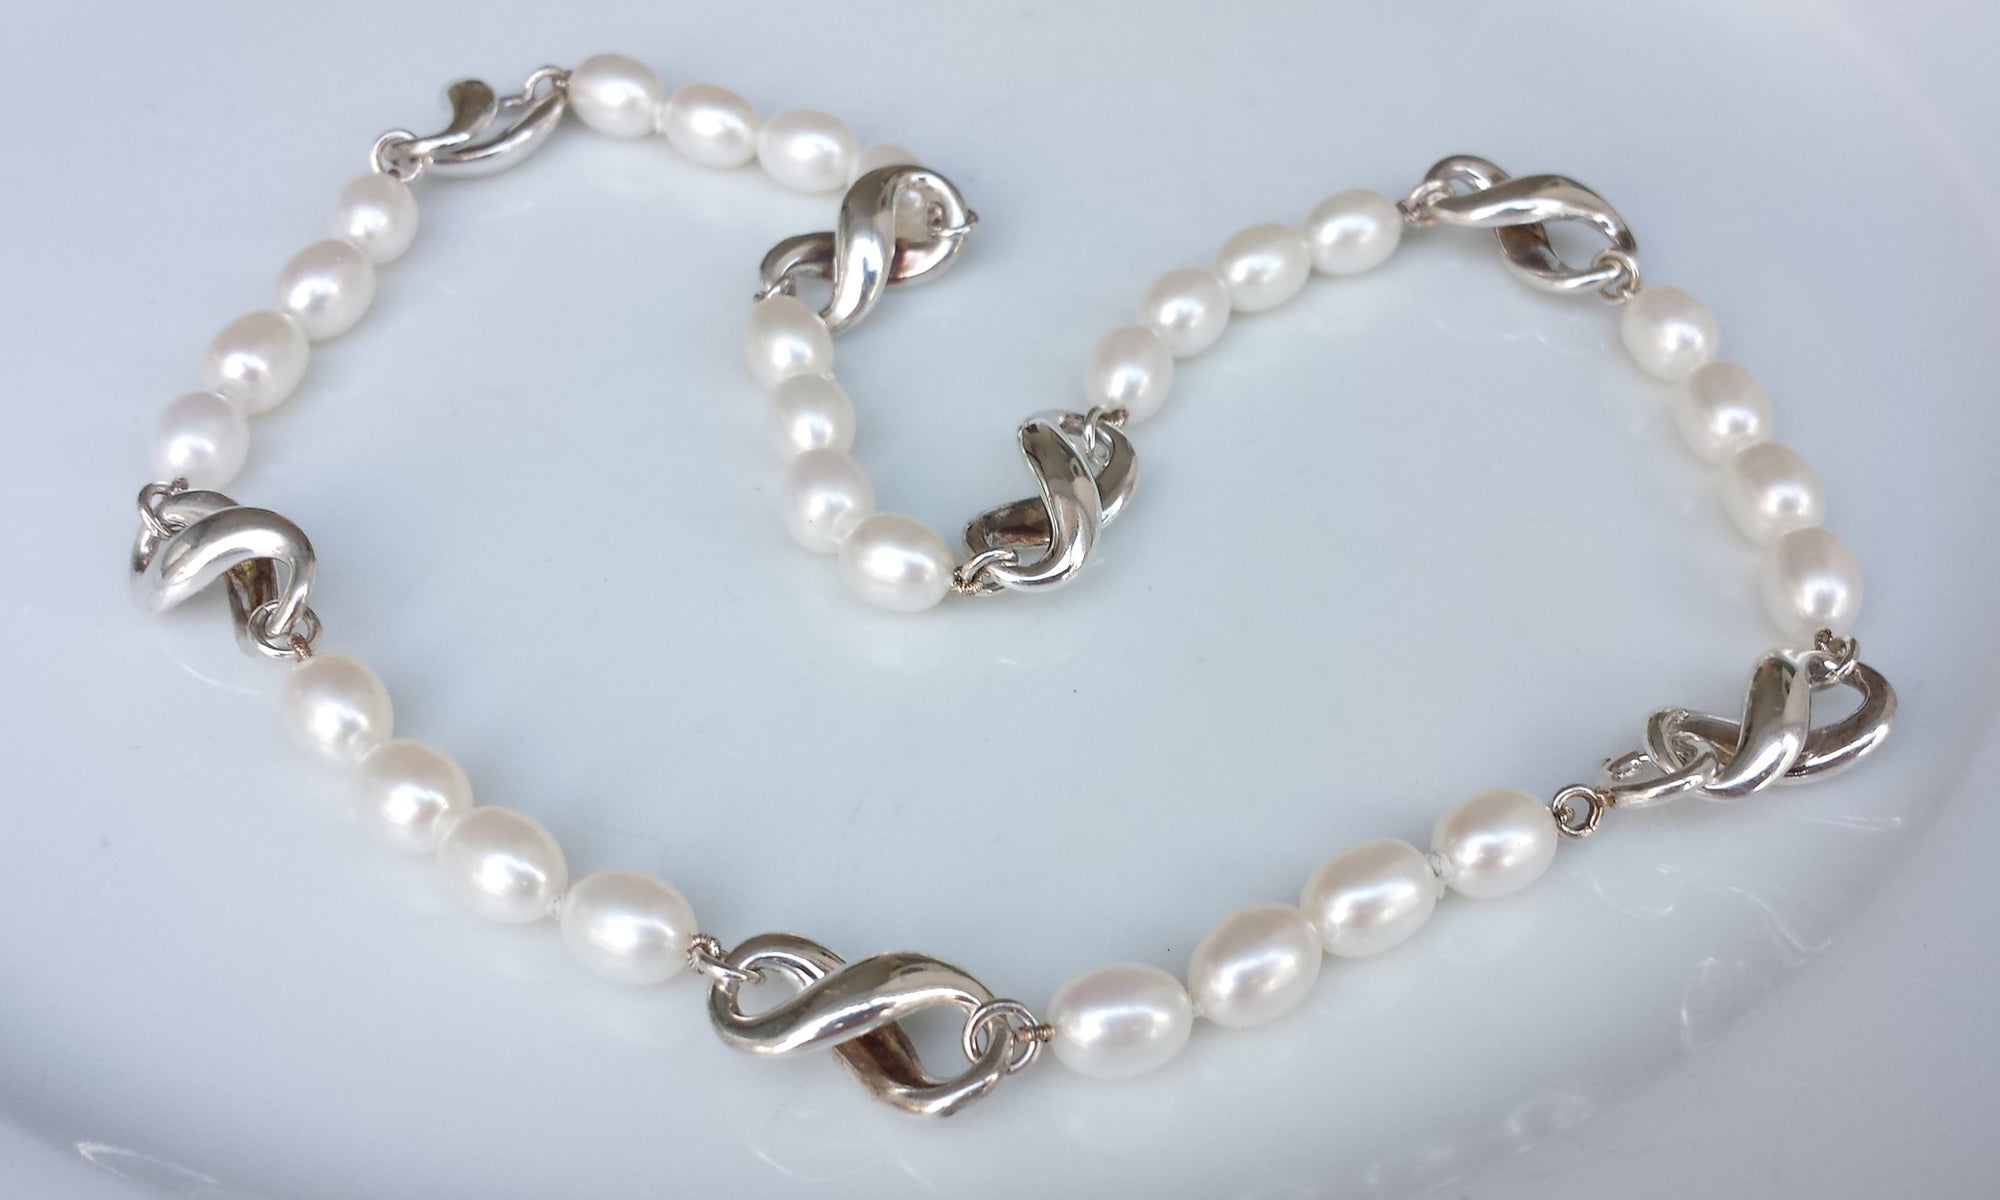 Tiffany & Co. Freshwater Pearl & Sterling Silver 16 inch Infinity (8) Necklace